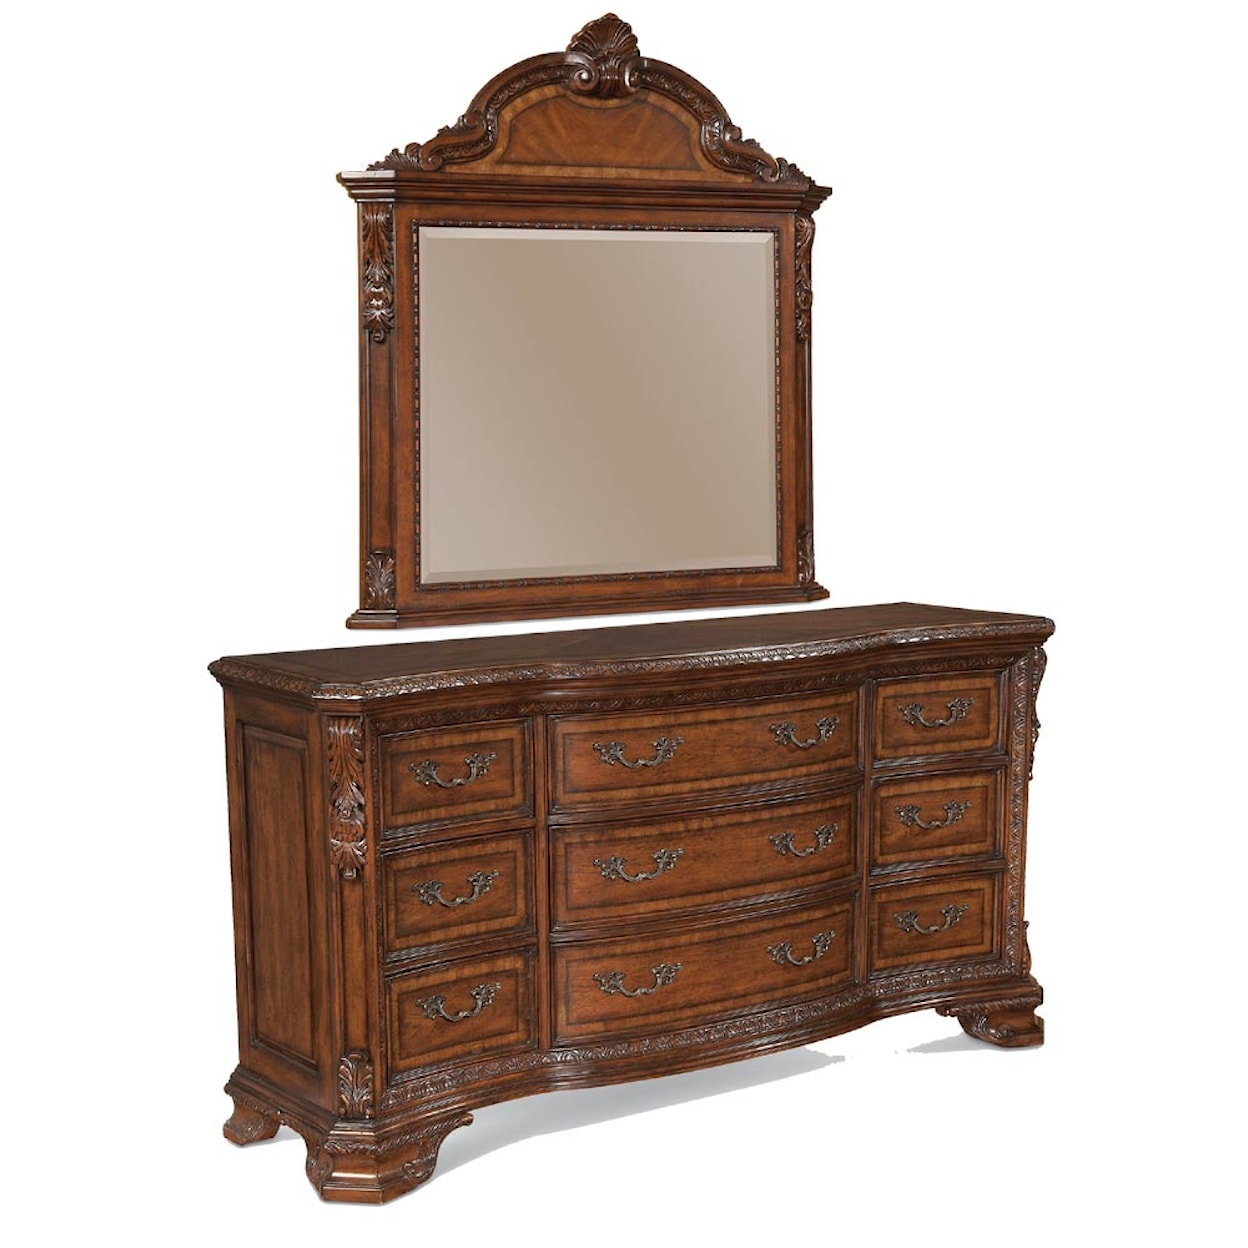 A.R.T. Furniture Inc Old World Drawer Dresser and Mirror